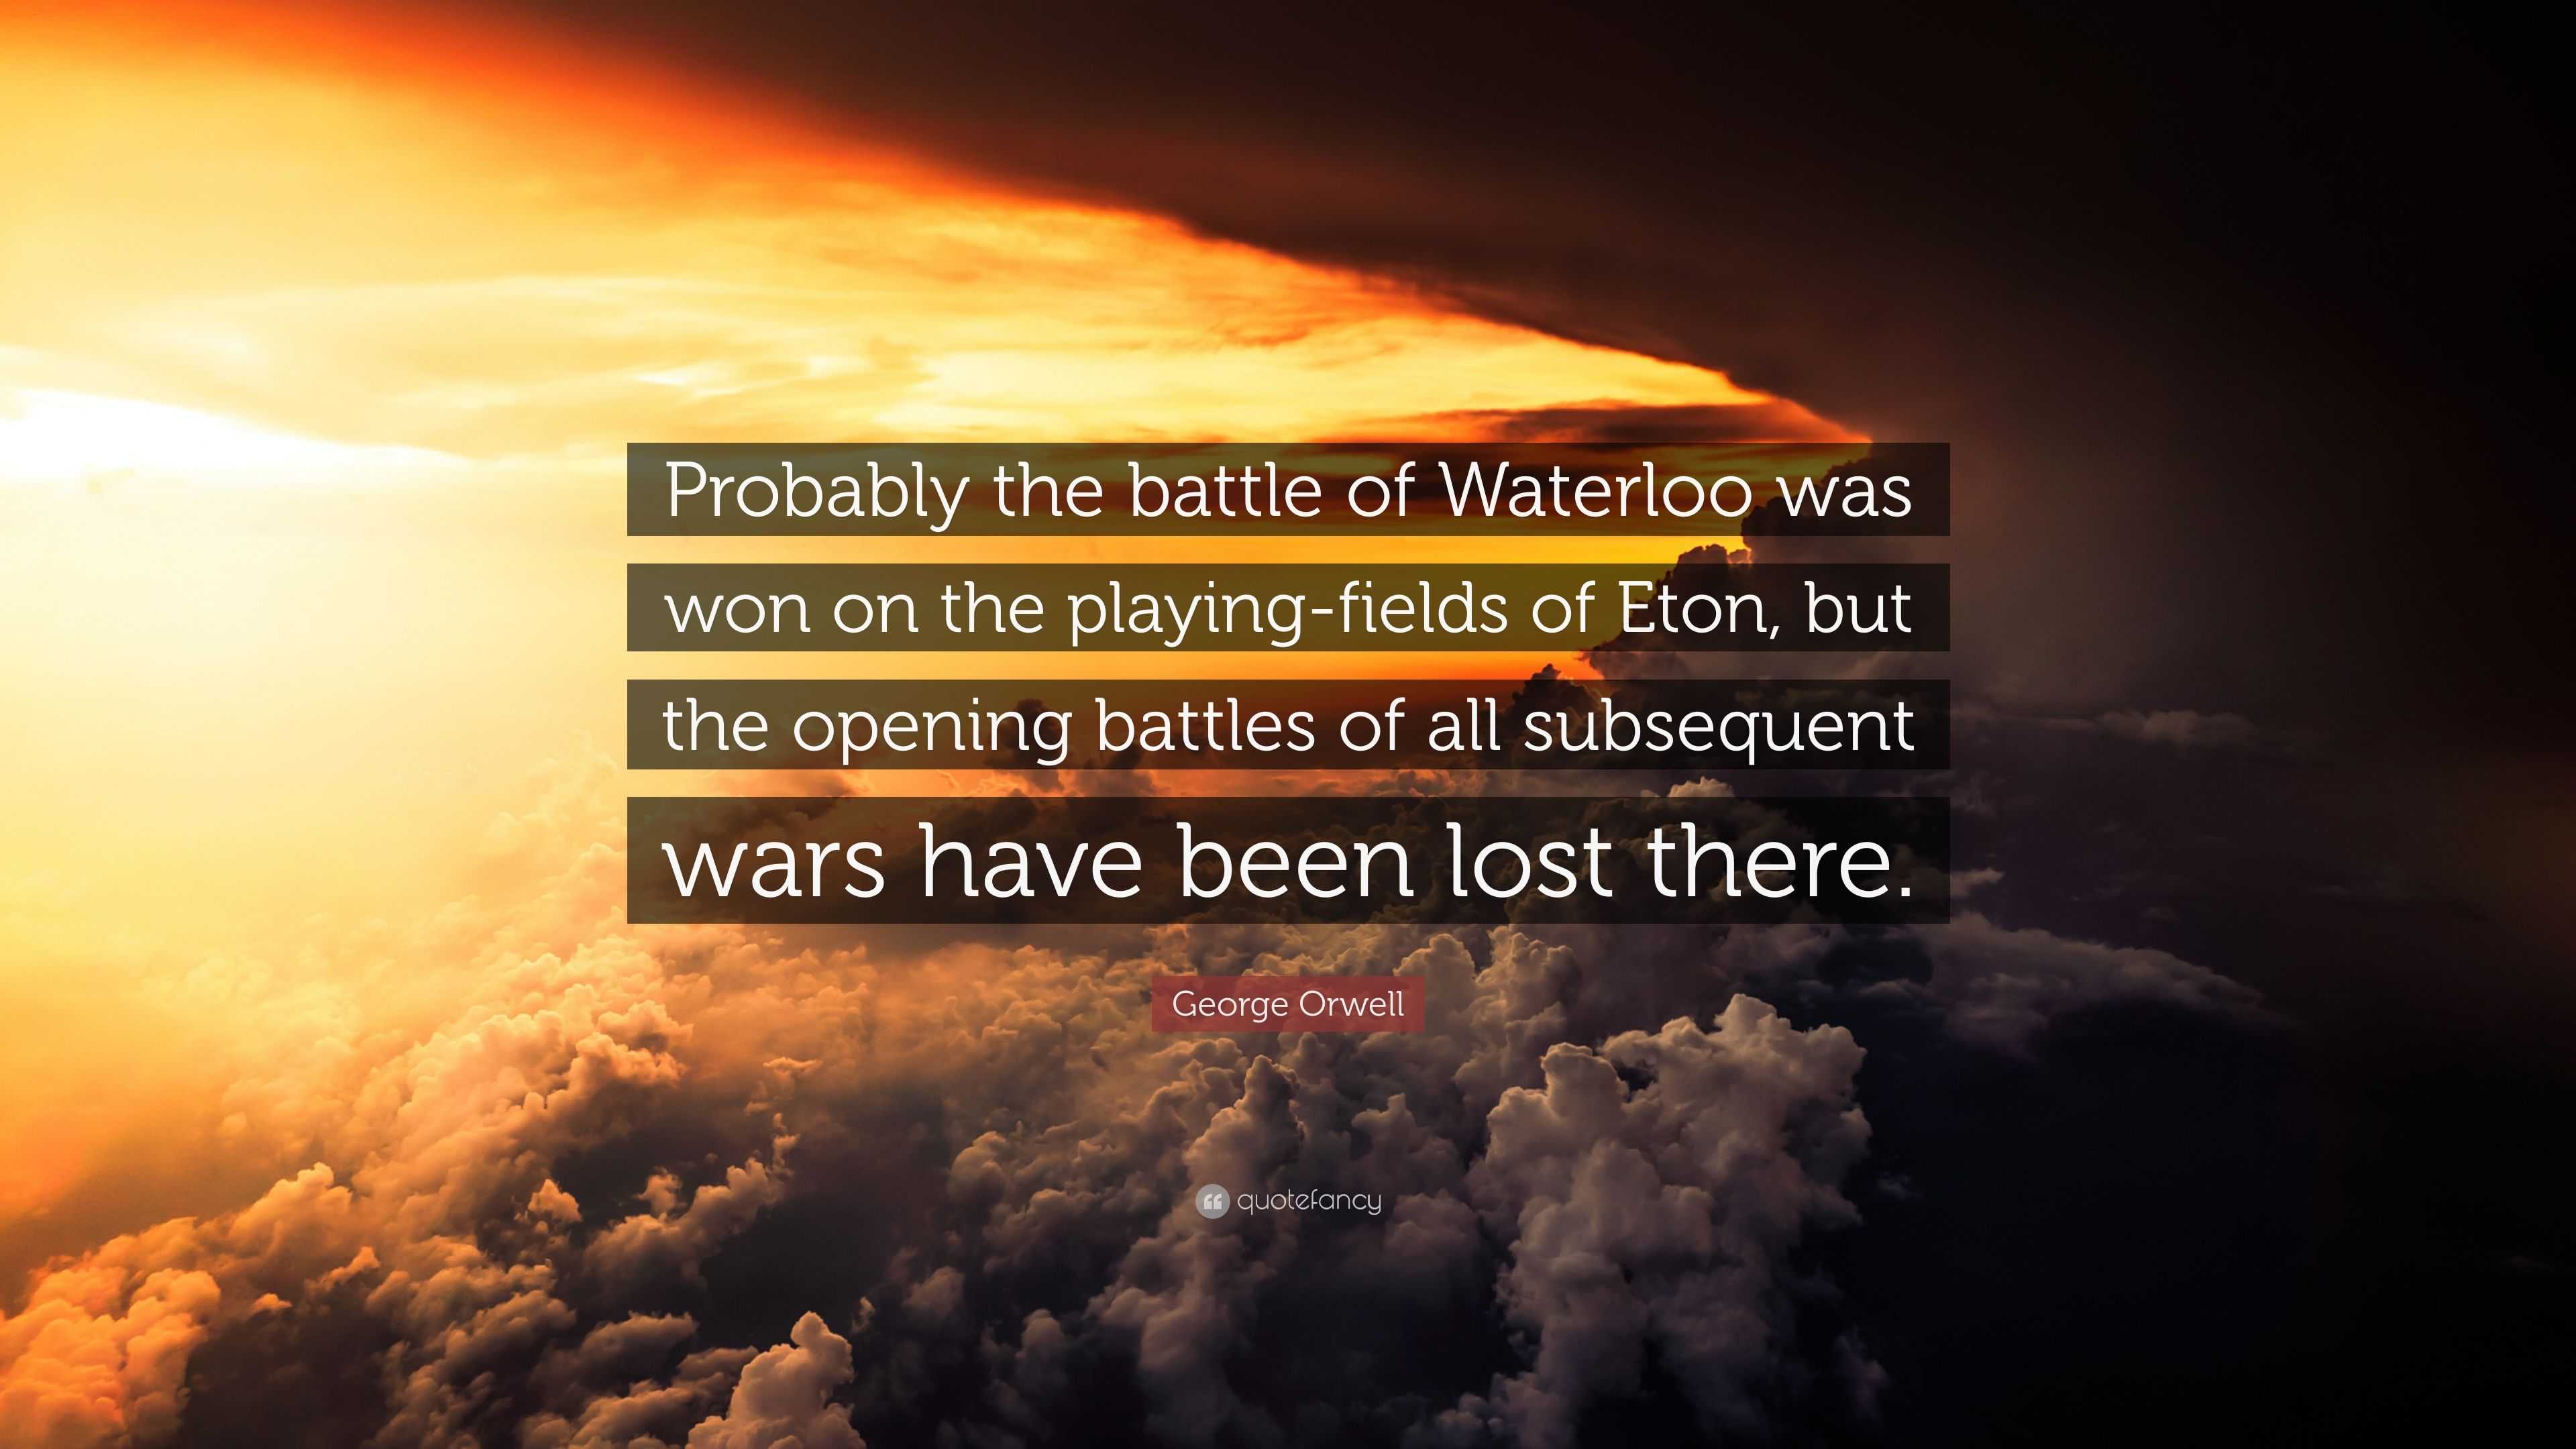 George Orwell Quote: “Probably the battle of Waterloo was won on the